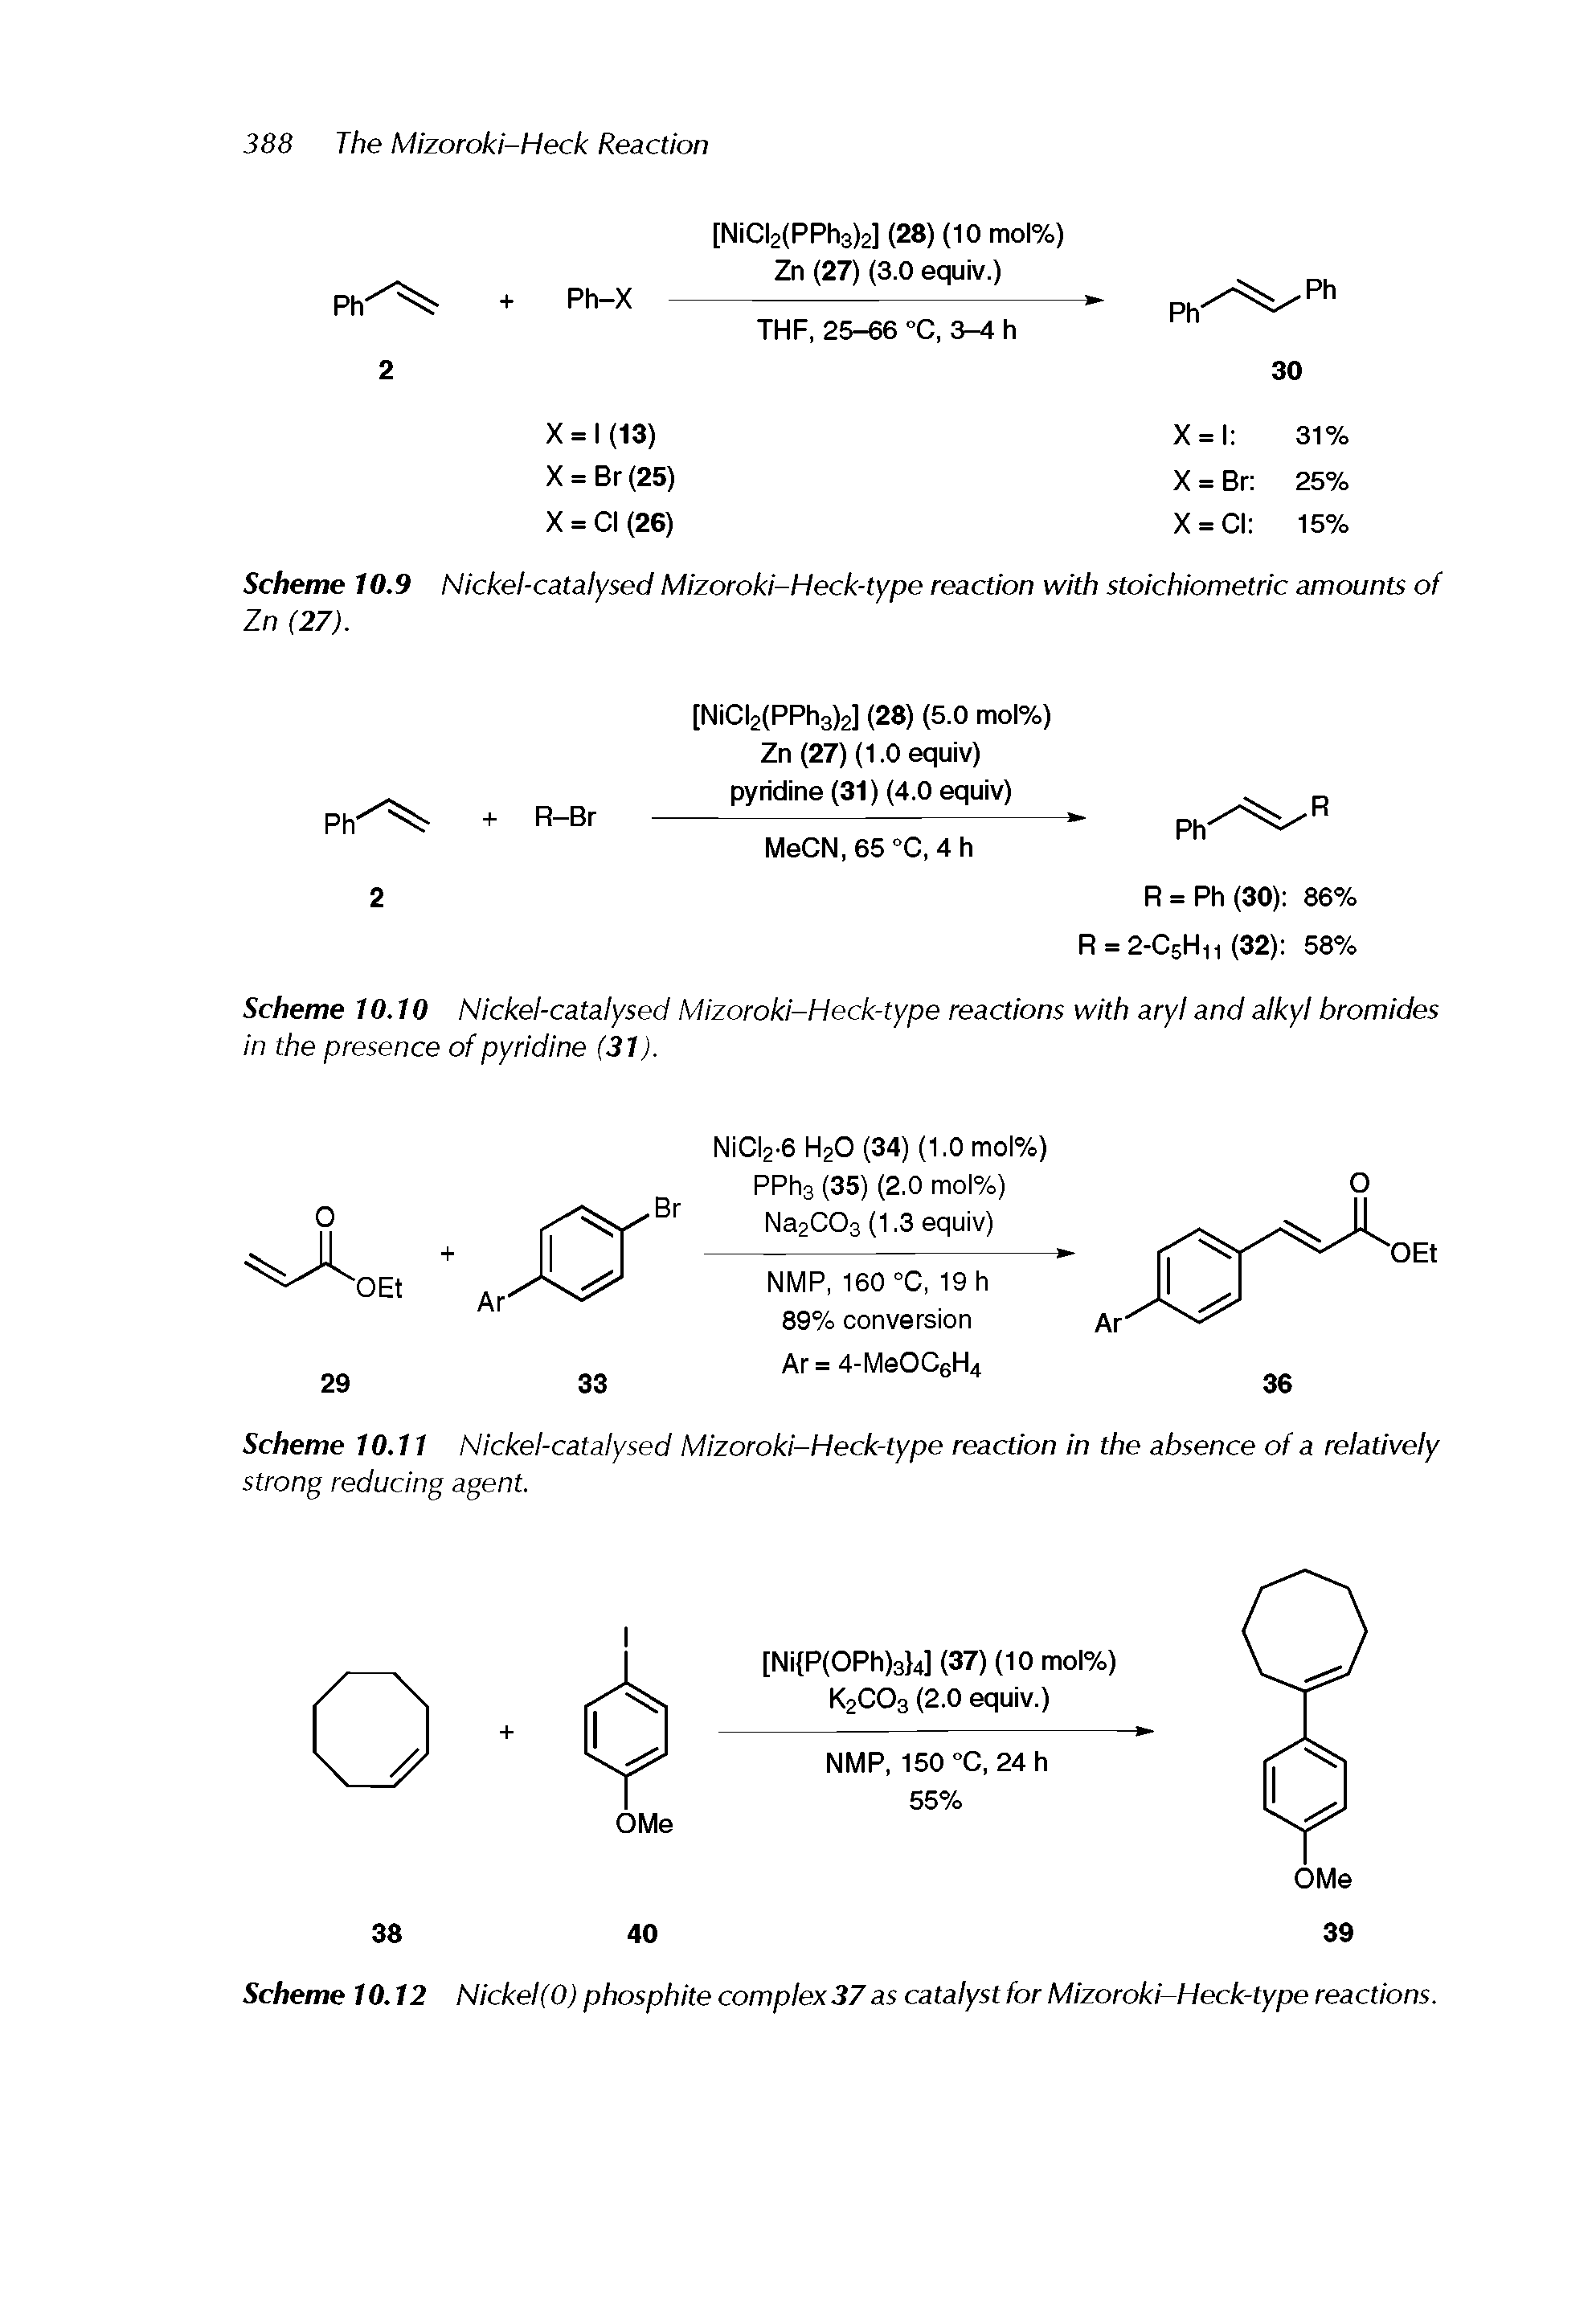 Scheme 10.10 Nickel-catalysed MIzorokl-Heck-type reactions with aryl and alkyl bromides in the presence of pyridine (31).